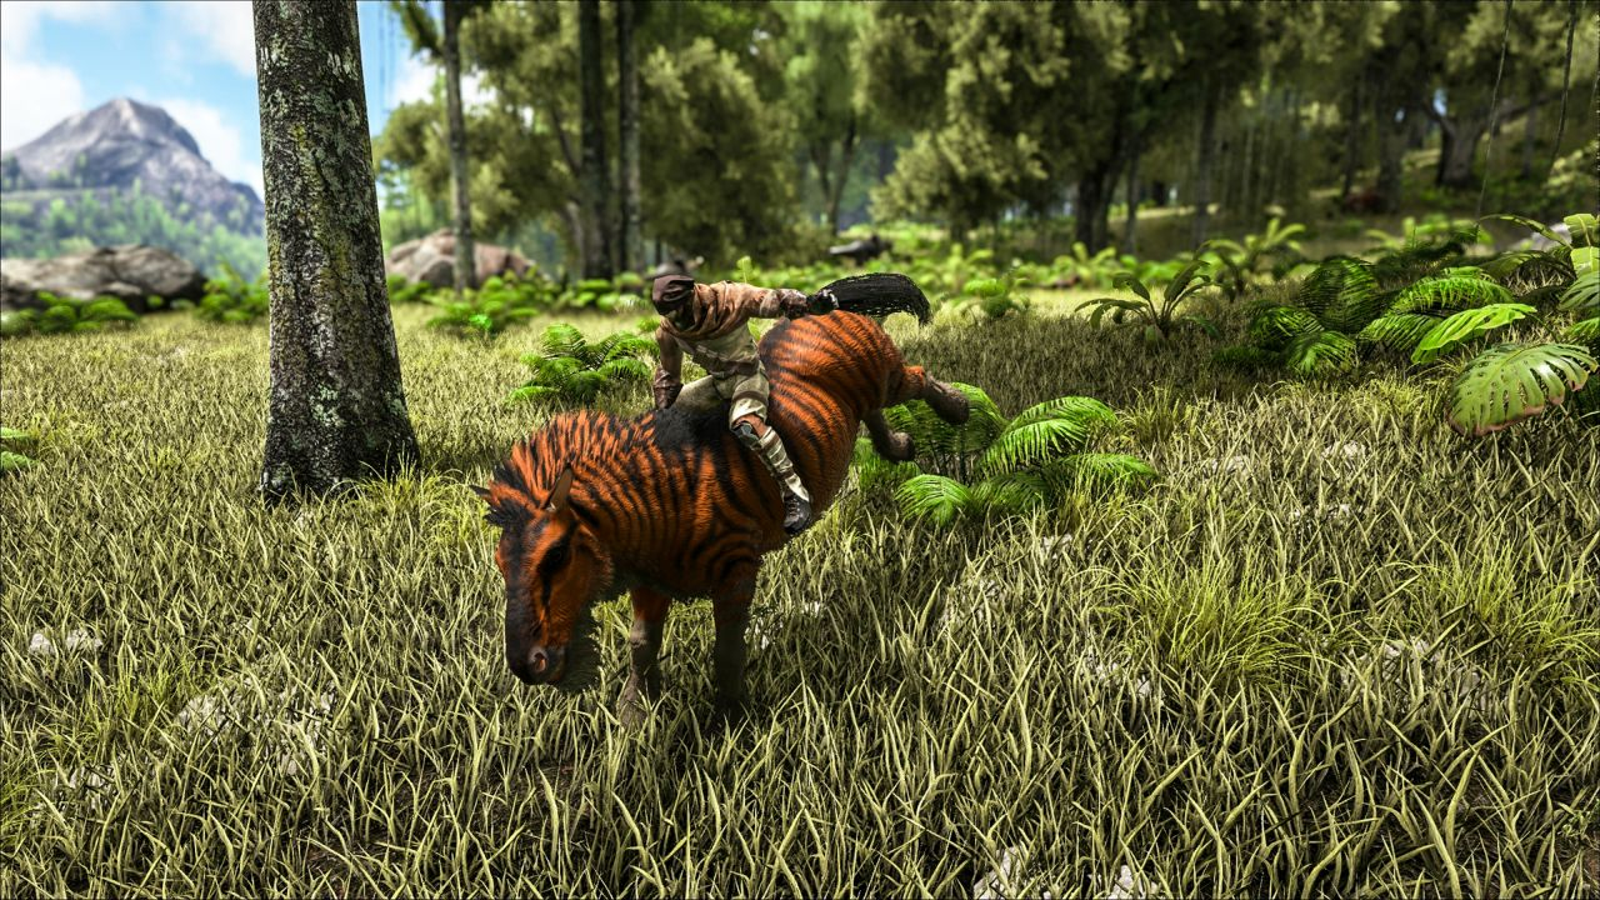 https://assetsio.reedpopcdn.com/ark_survival_evolved_update_v256-2.jpg?width=1600&height=900&fit=crop&quality=100&format=png&enable=upscale&auto=webp